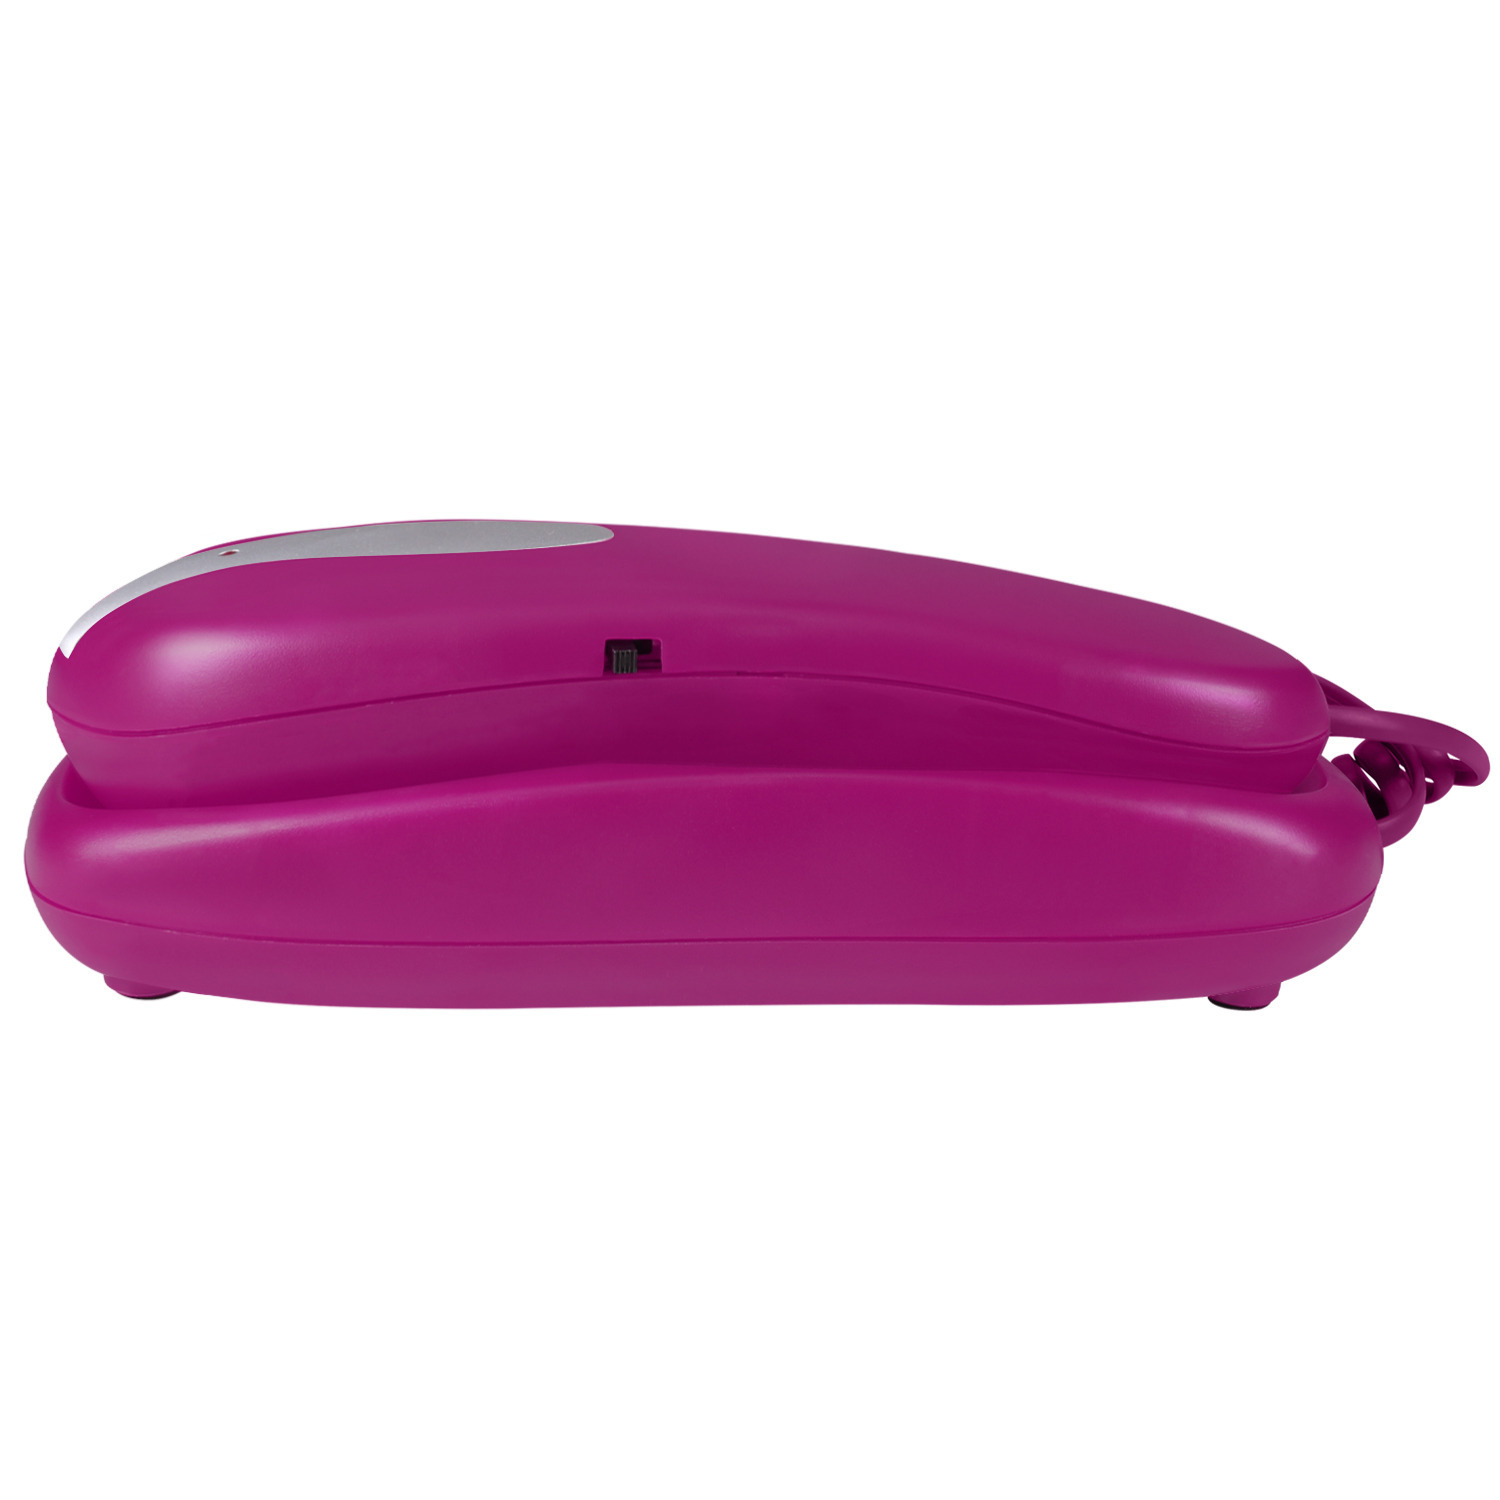 Slimline Purple Colored Phone For Wall Or Desk With Memory